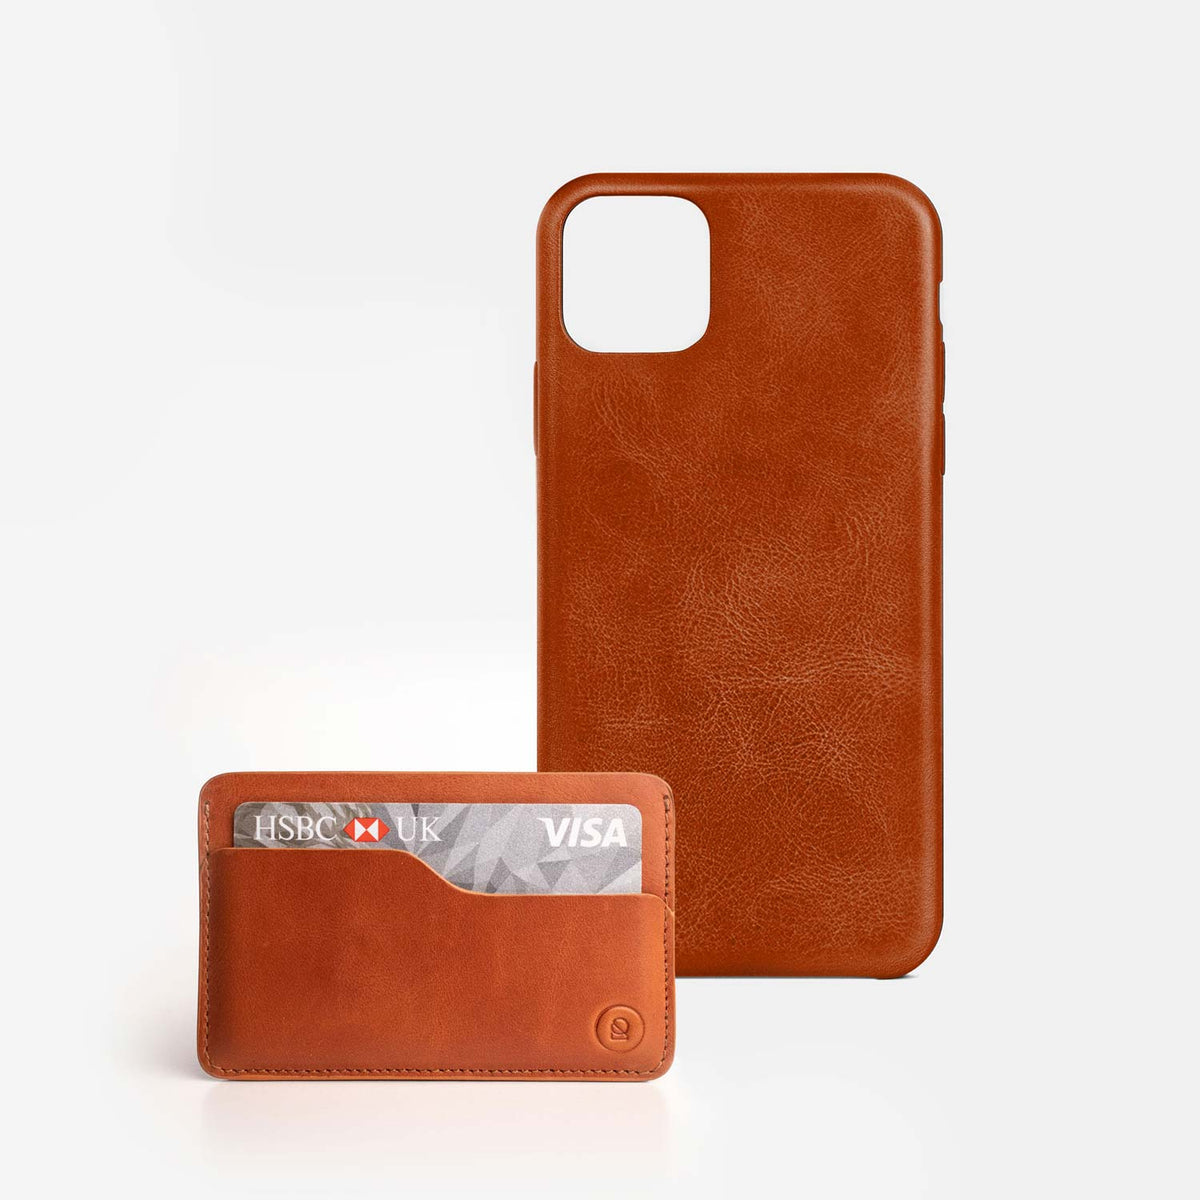 Leather iPhone 11 Pro Max Shell Case - Saddle Brown - RYAN London